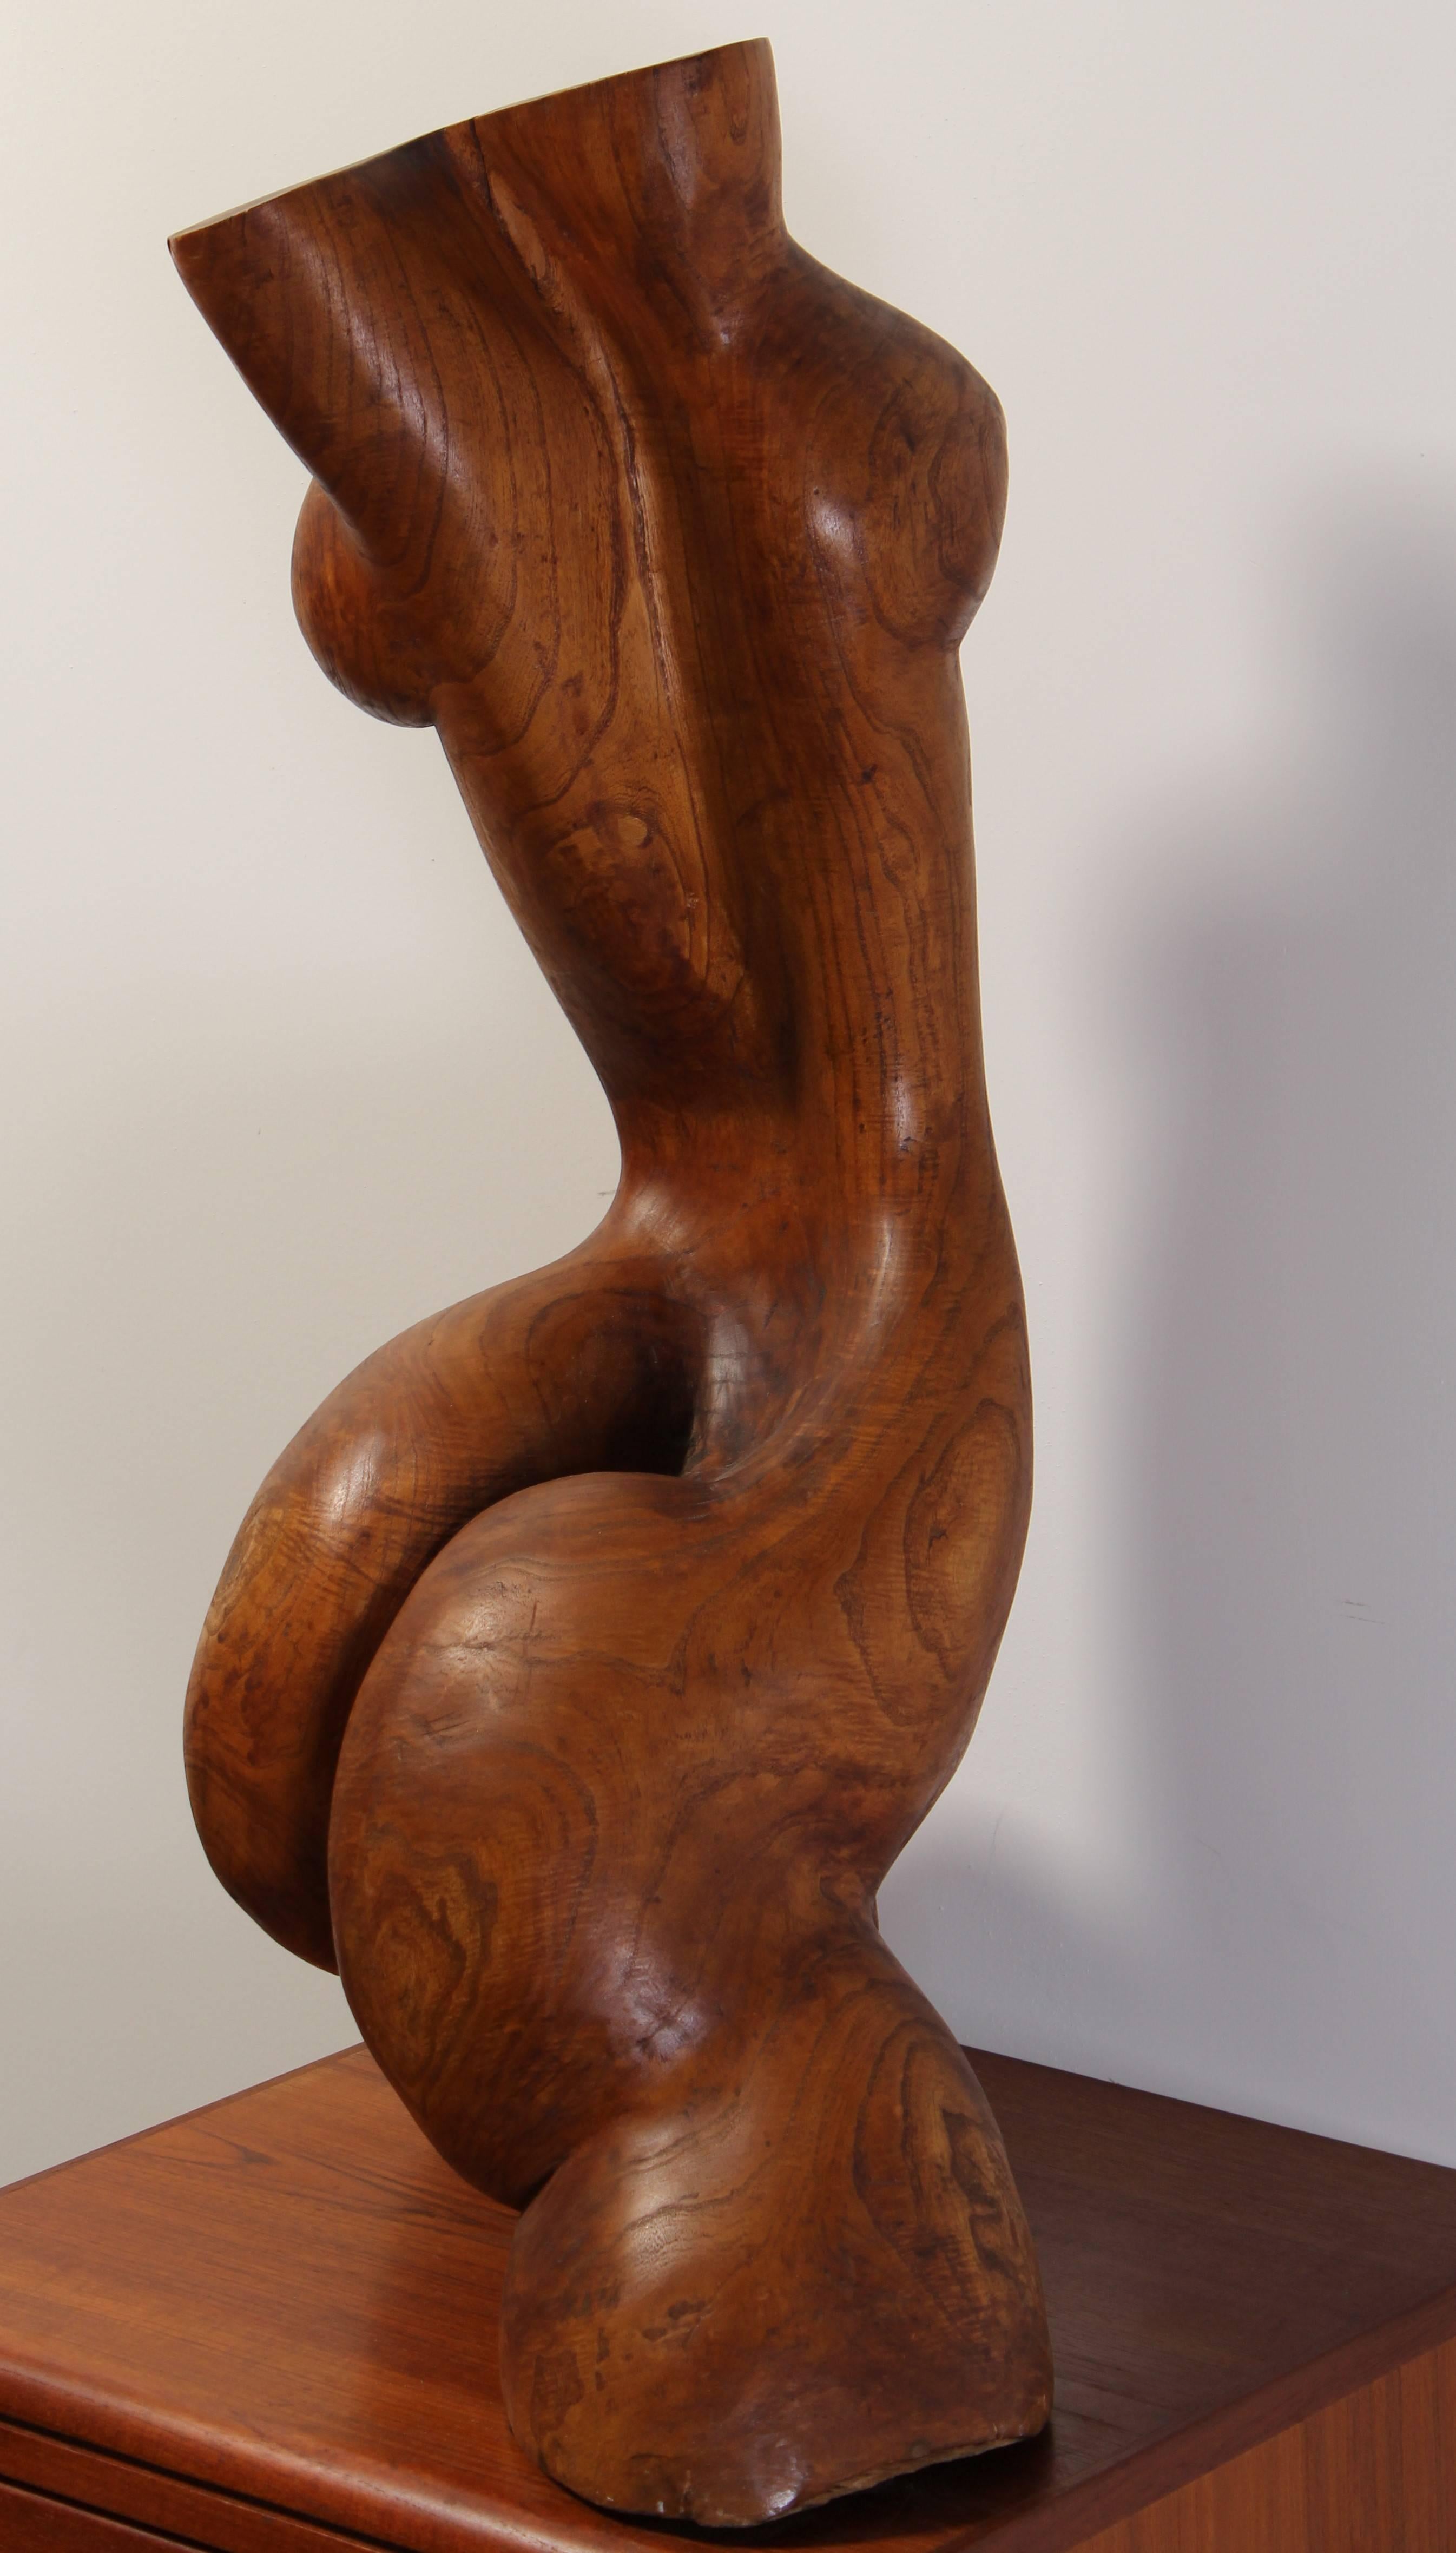 An exquisite artist made, burled hard wood, hand-carved sculpture in the manner of Aristide Maillol. Although unsigned, the artist put a lot of work into this provocative interpretation of a nude woman's torso. This piece was well thought out in the